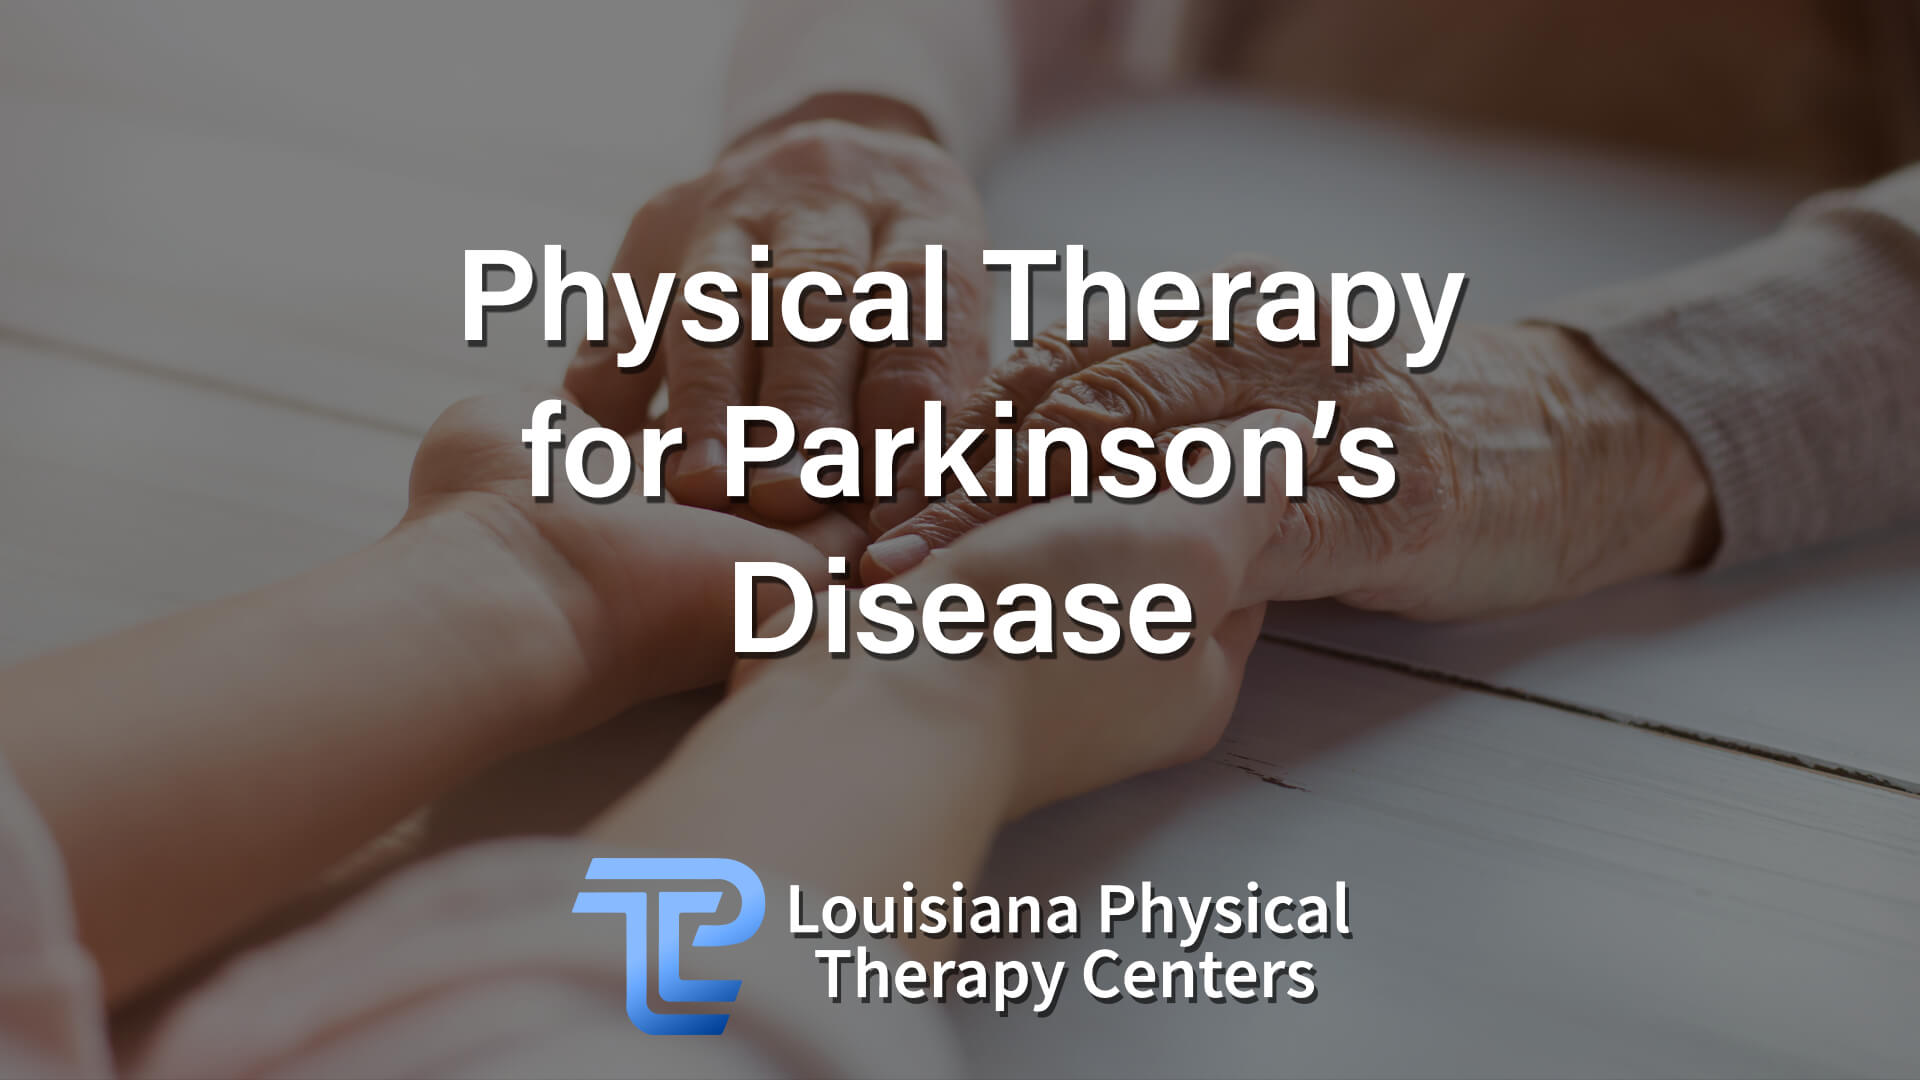 Physical Therapy for Parkinson’s Disease